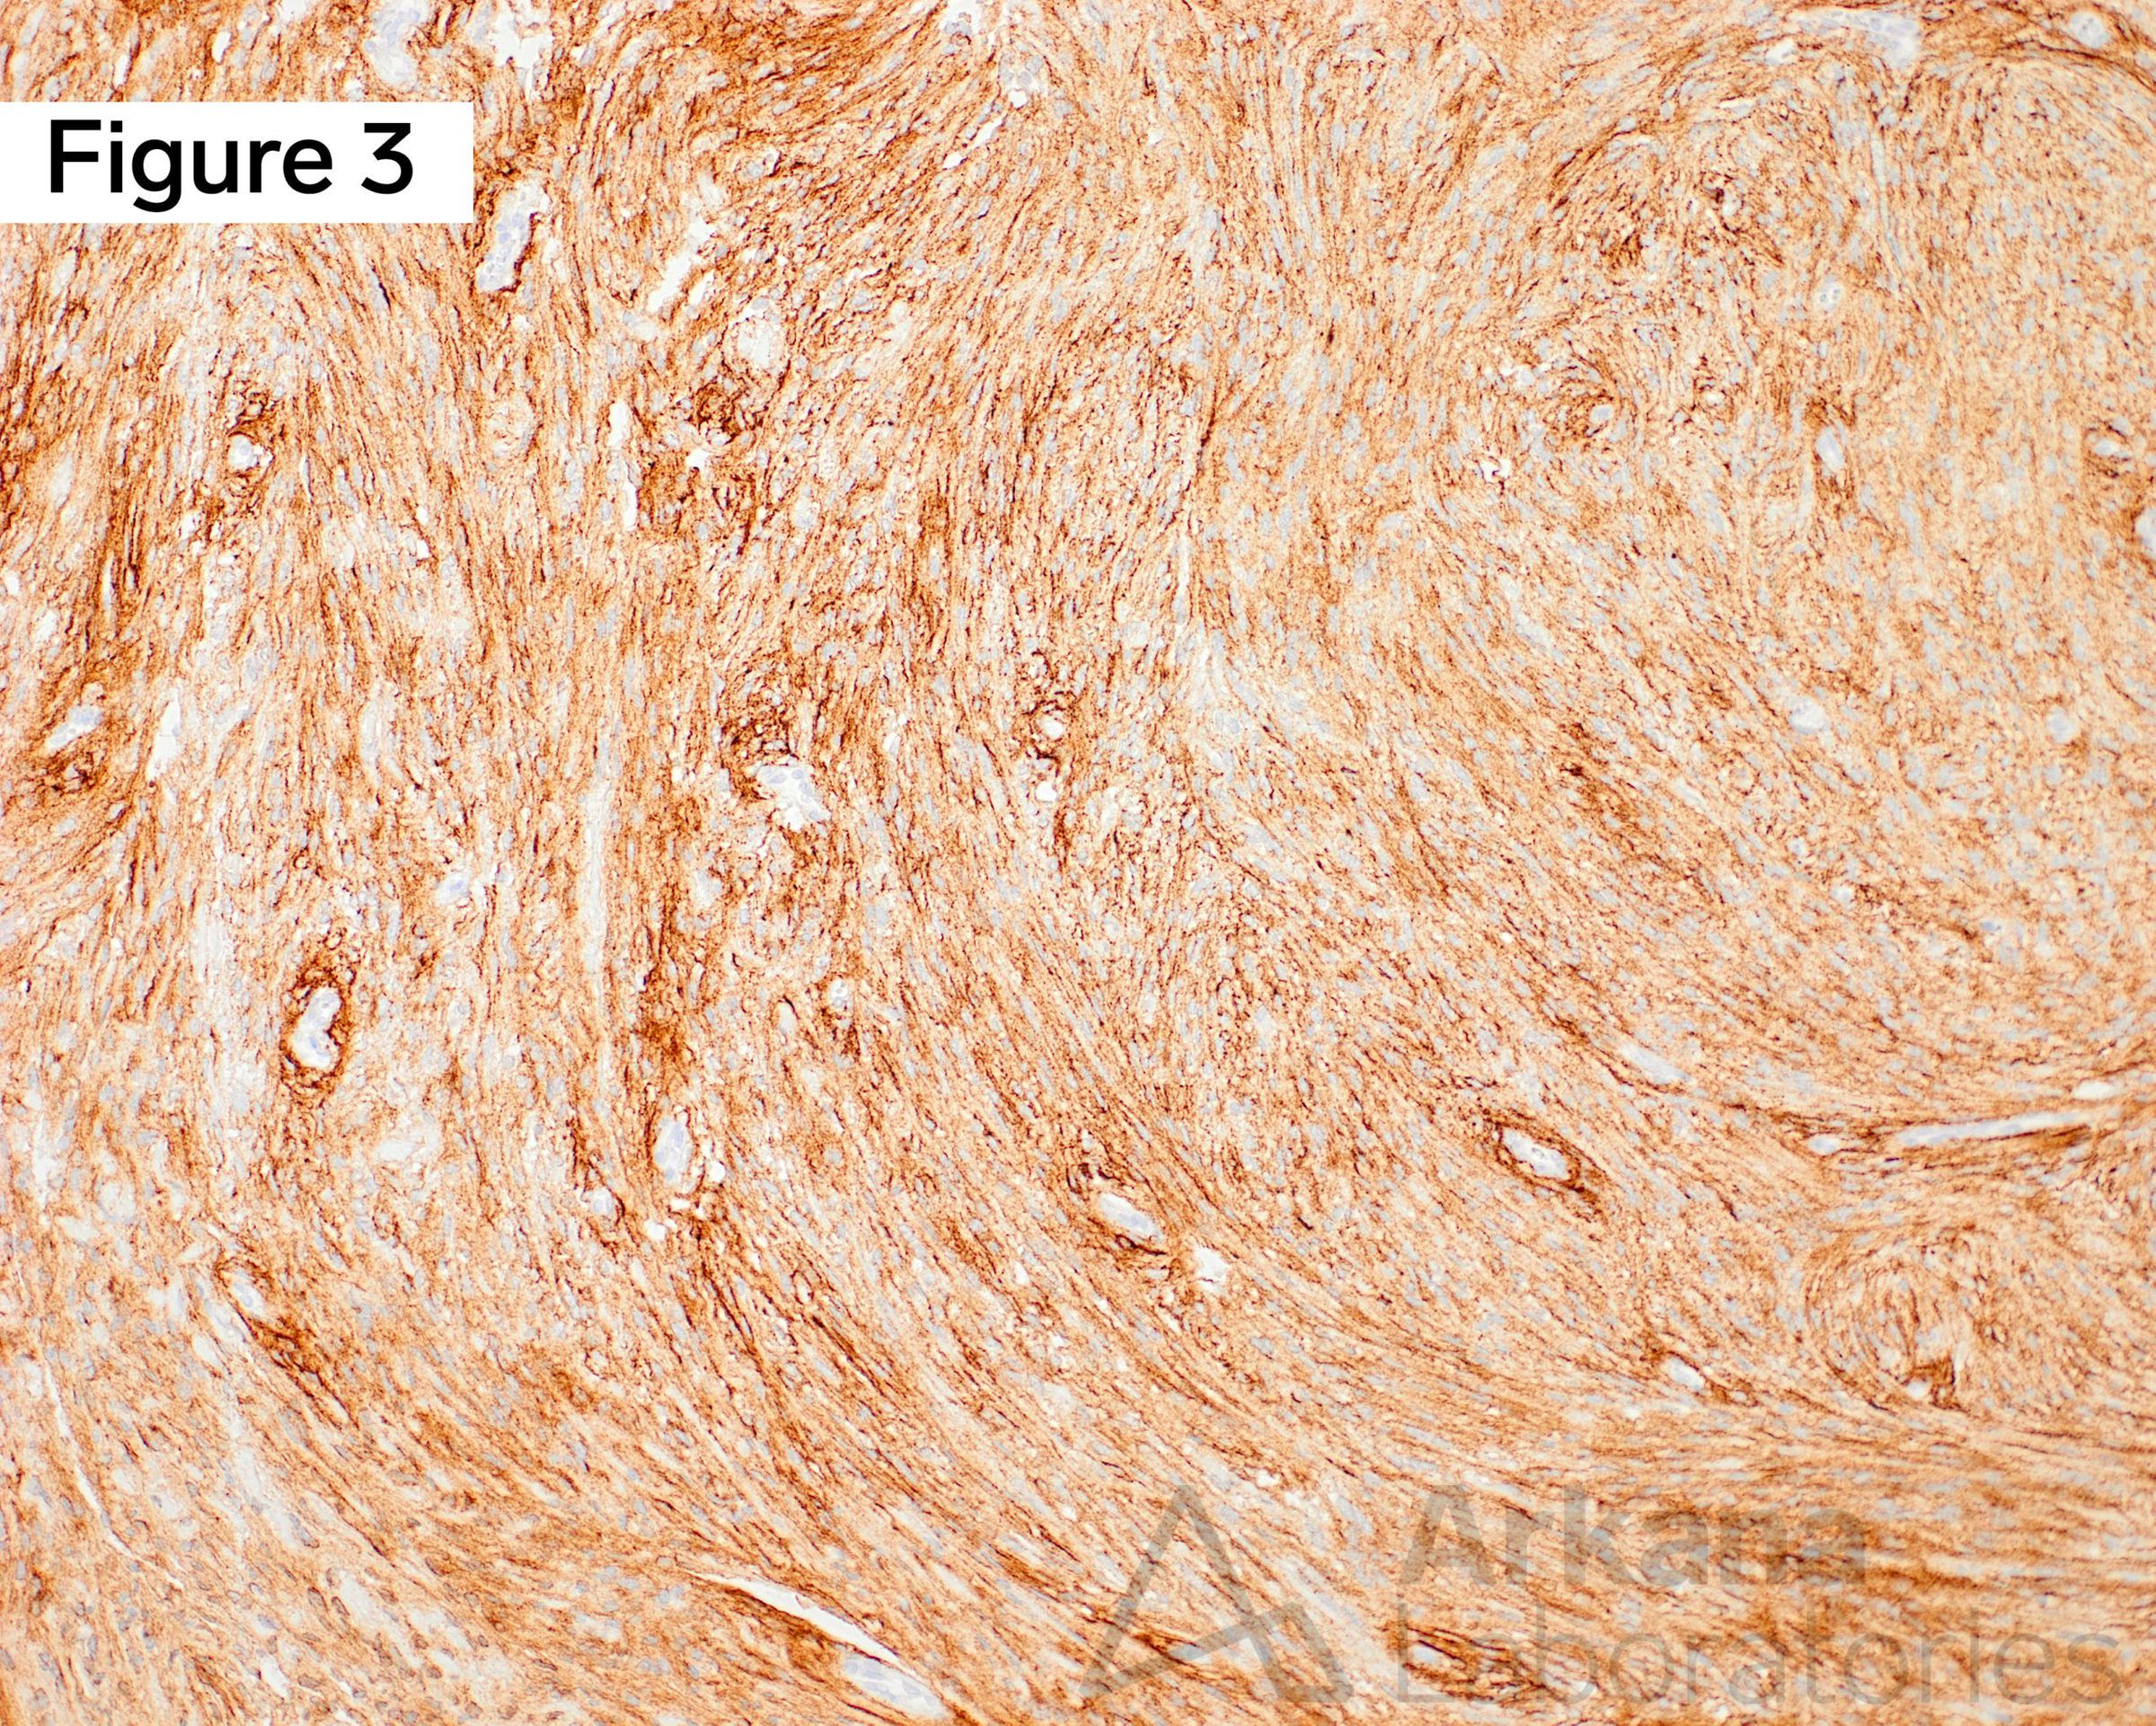 Immunohistochemical (IHC) work-up demonstrated strong diffuse membranous staining with epithelial membrane antigen (EMA+)